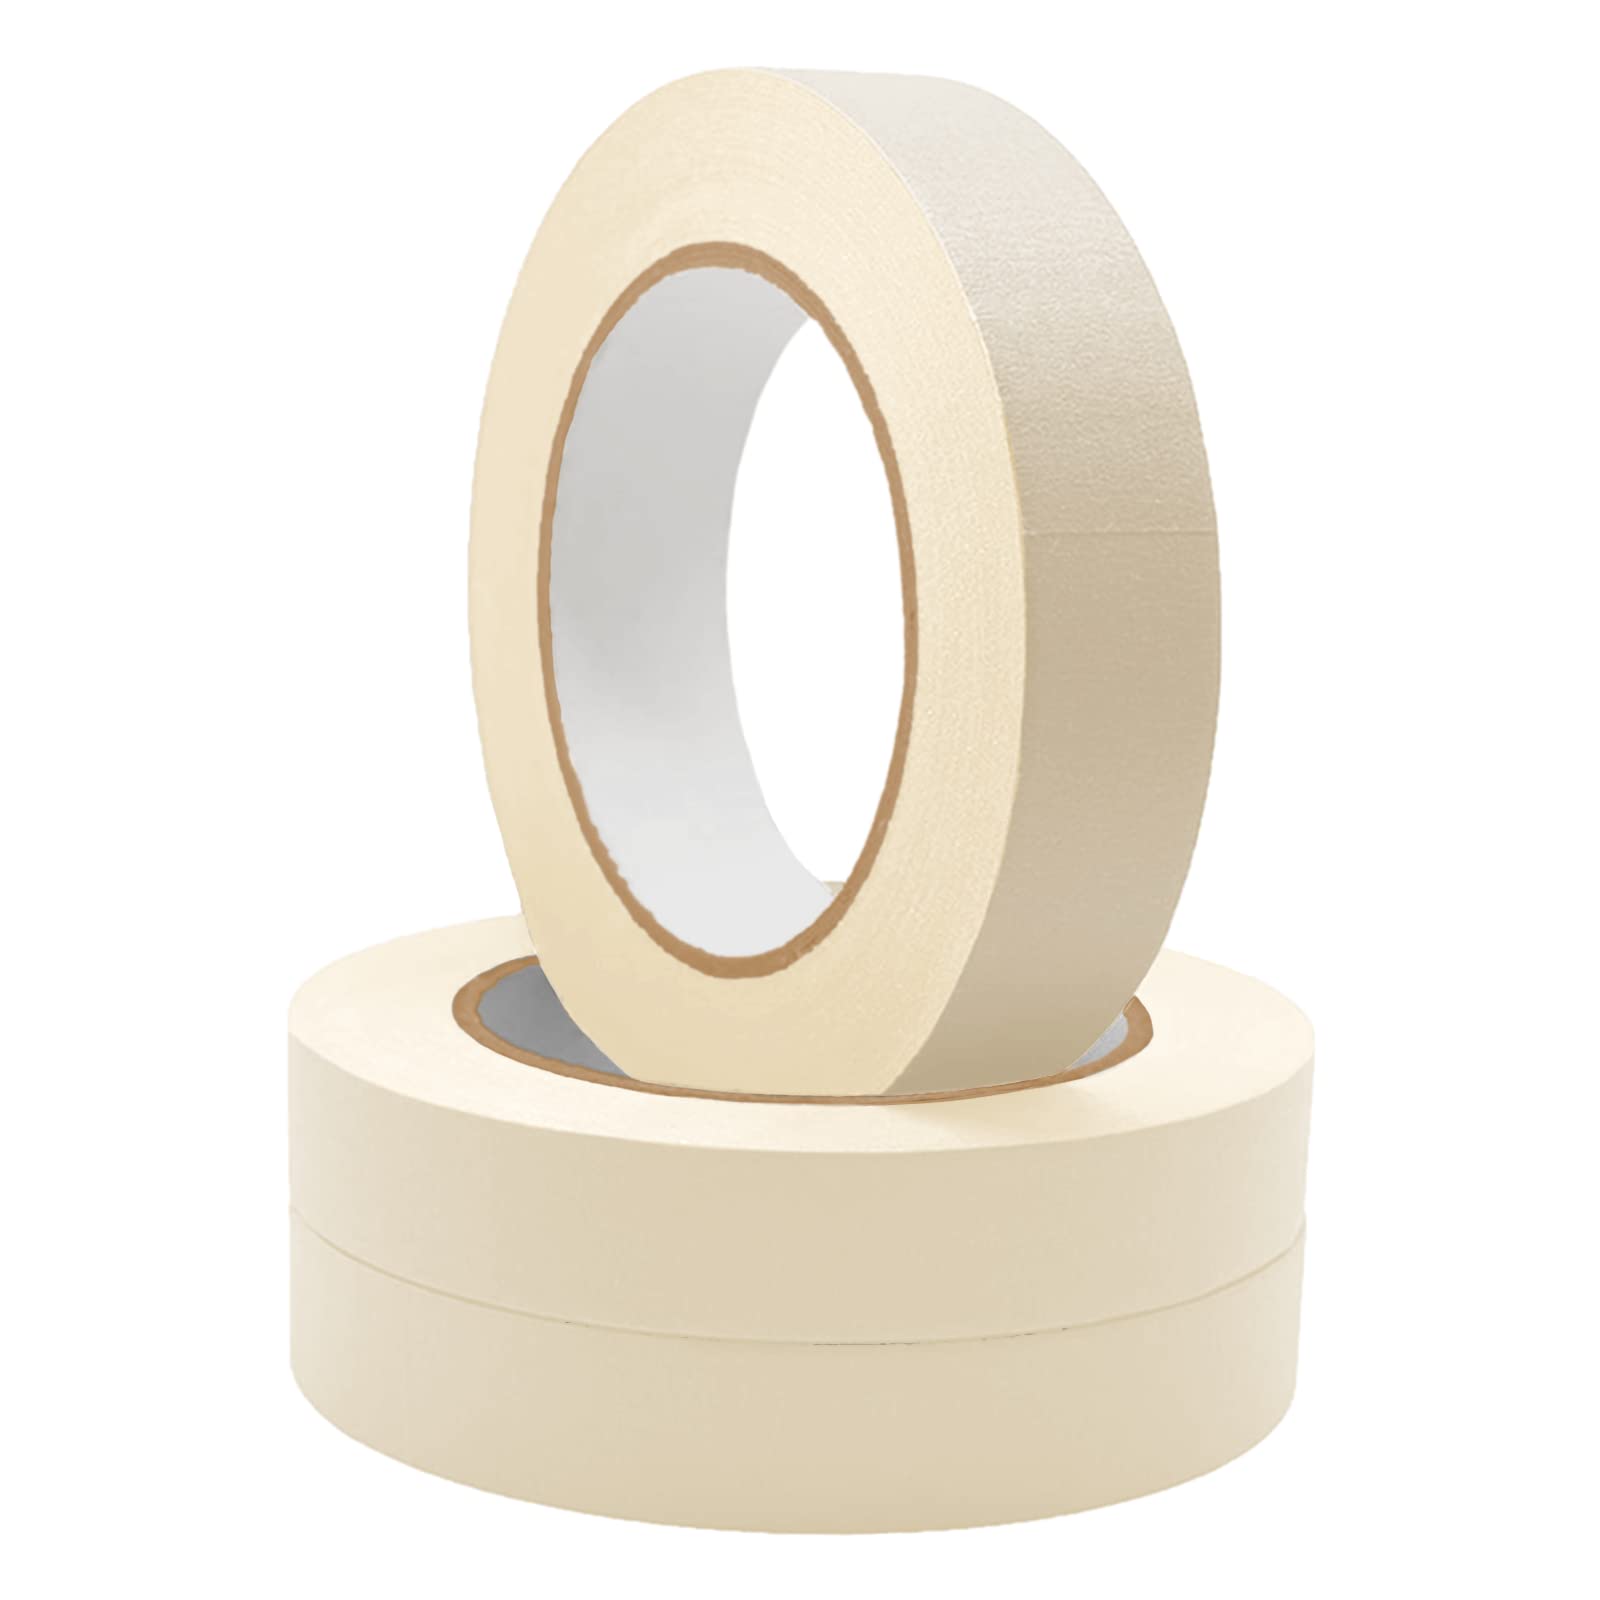 A2PT02 TIANBO FIRST Masking Tape, Masking Tape 1.41 Inch Wide Thin Masking  Tape Bulk White Painters Tape Beige Masking Tape for Paintin